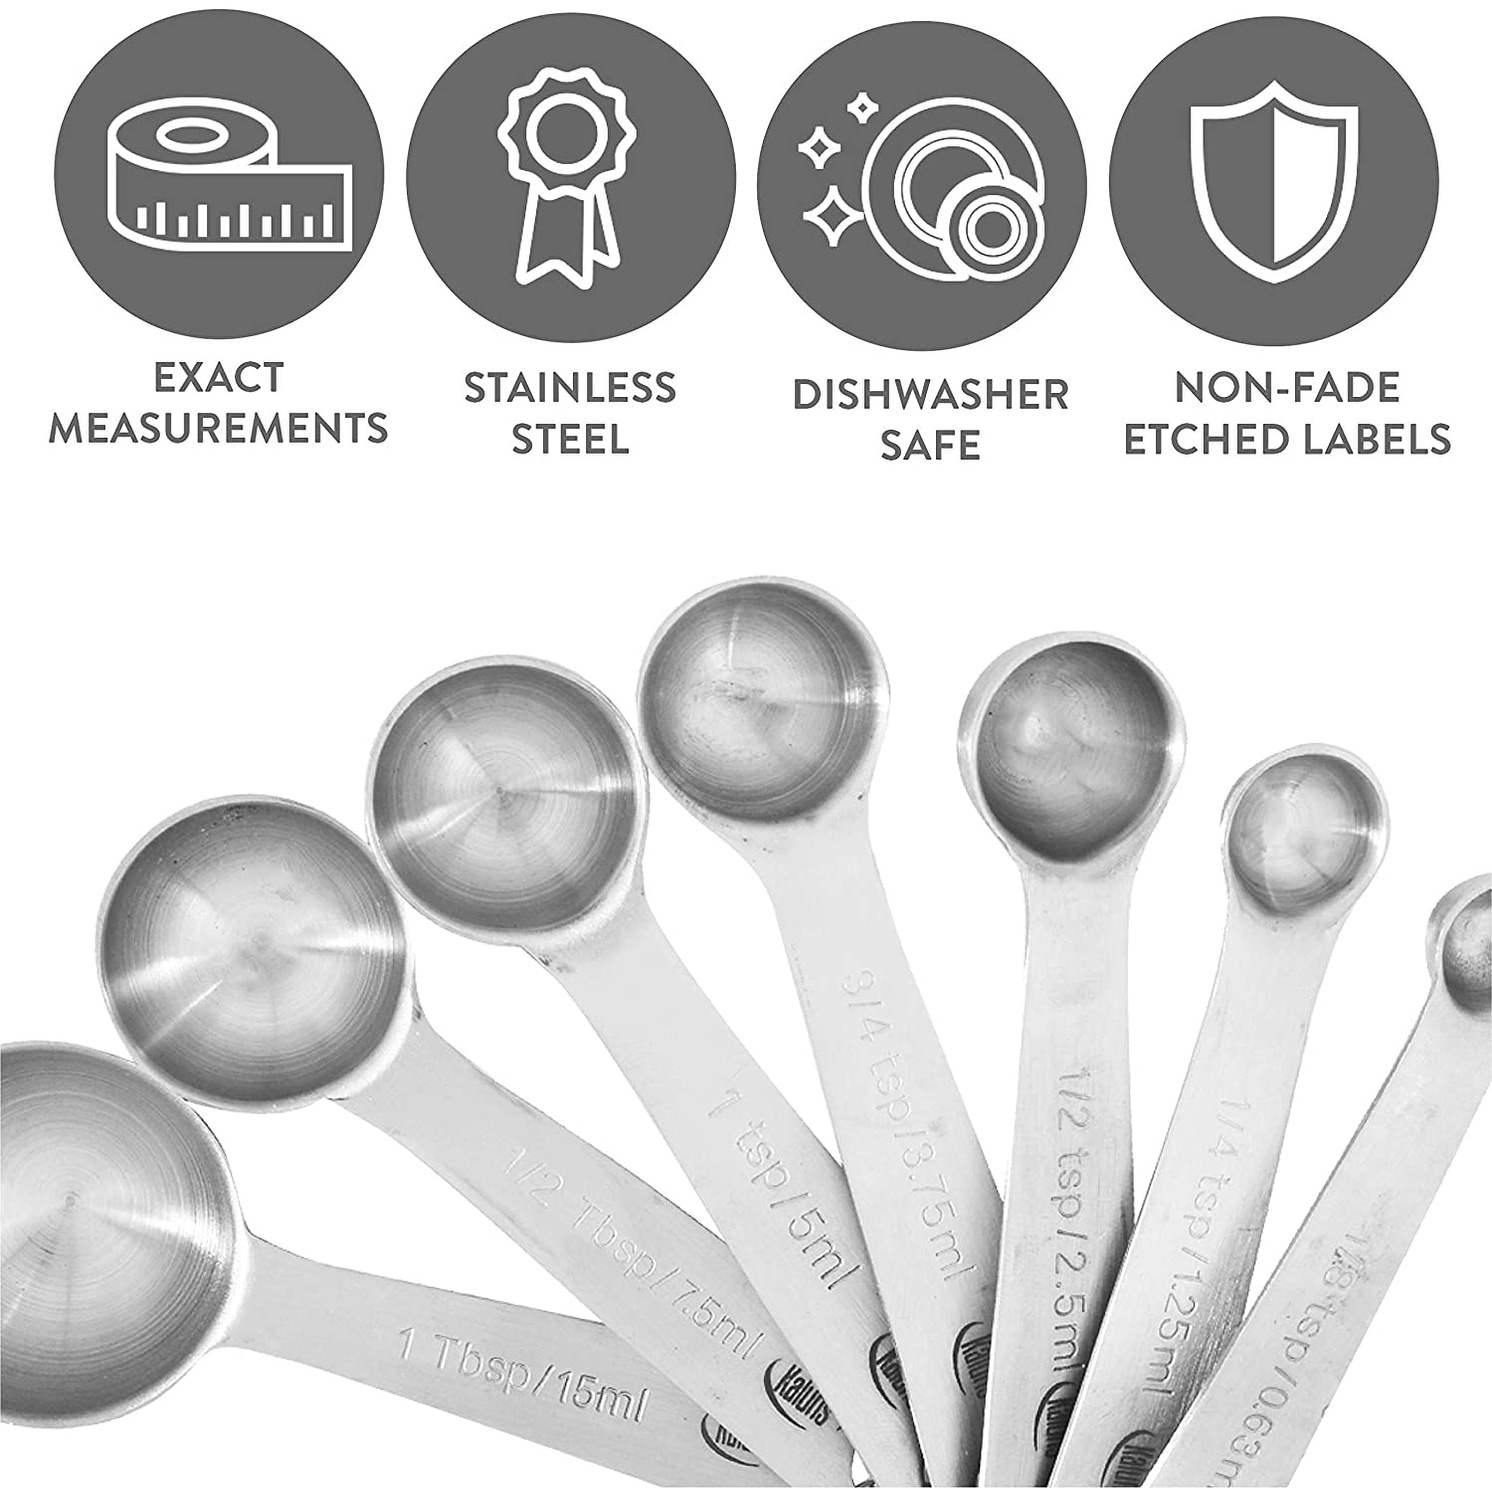 https://ak1.ostkcdn.com/images/products/is/images/direct/1aef773f0eef8df8aa709917896eab03ce66c494/Kaluns-Measuring-Cups%2C-Measuring-Spoons%2C-16-Piece-Stainless-Steel-Measuring-Set-Includes-Leveler-and-Measurements-Card.jpg